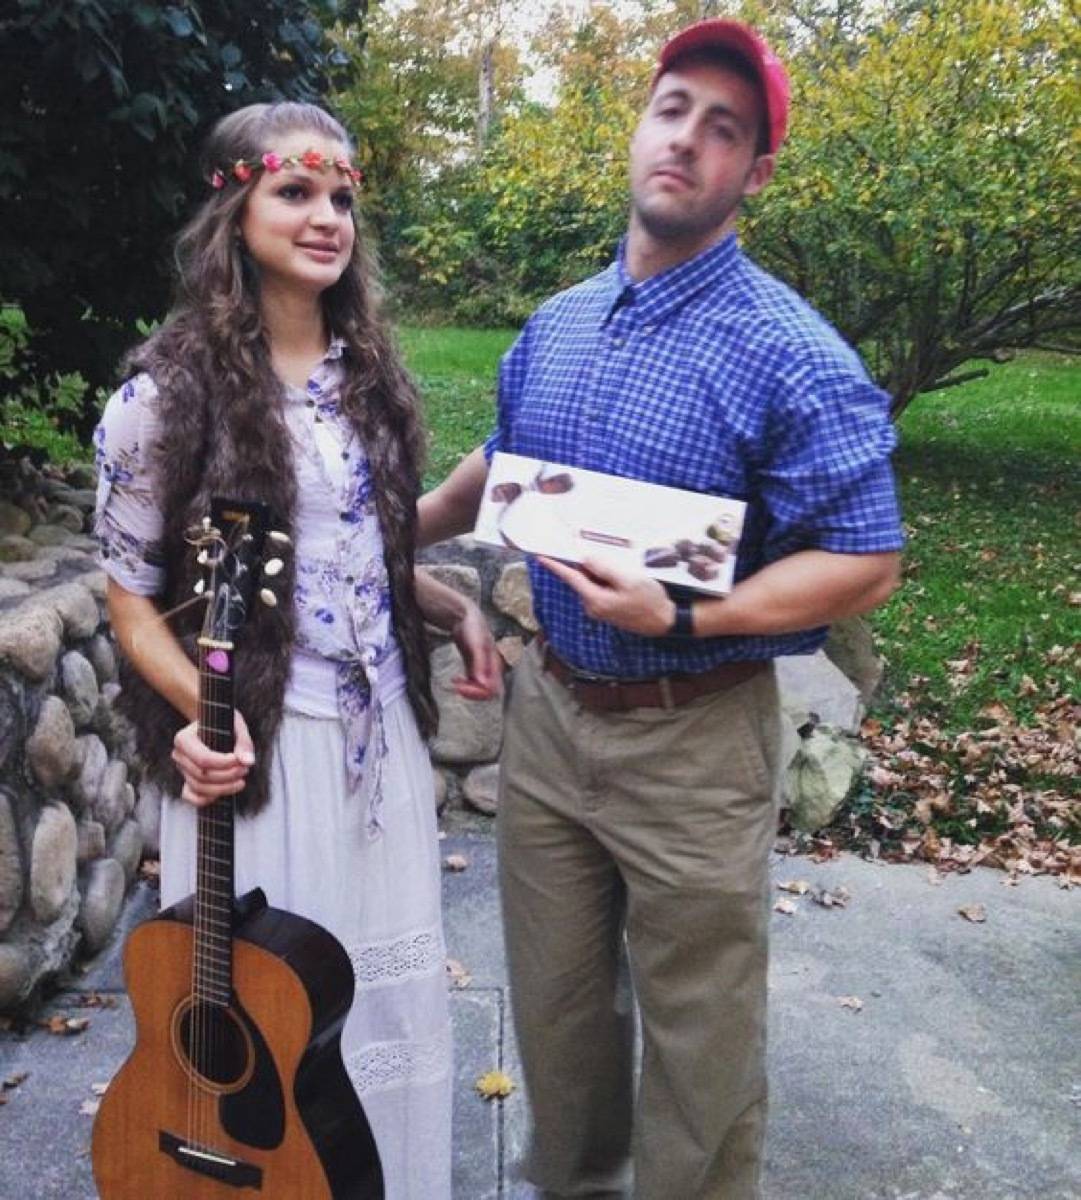 Forrest Gump and Jenny